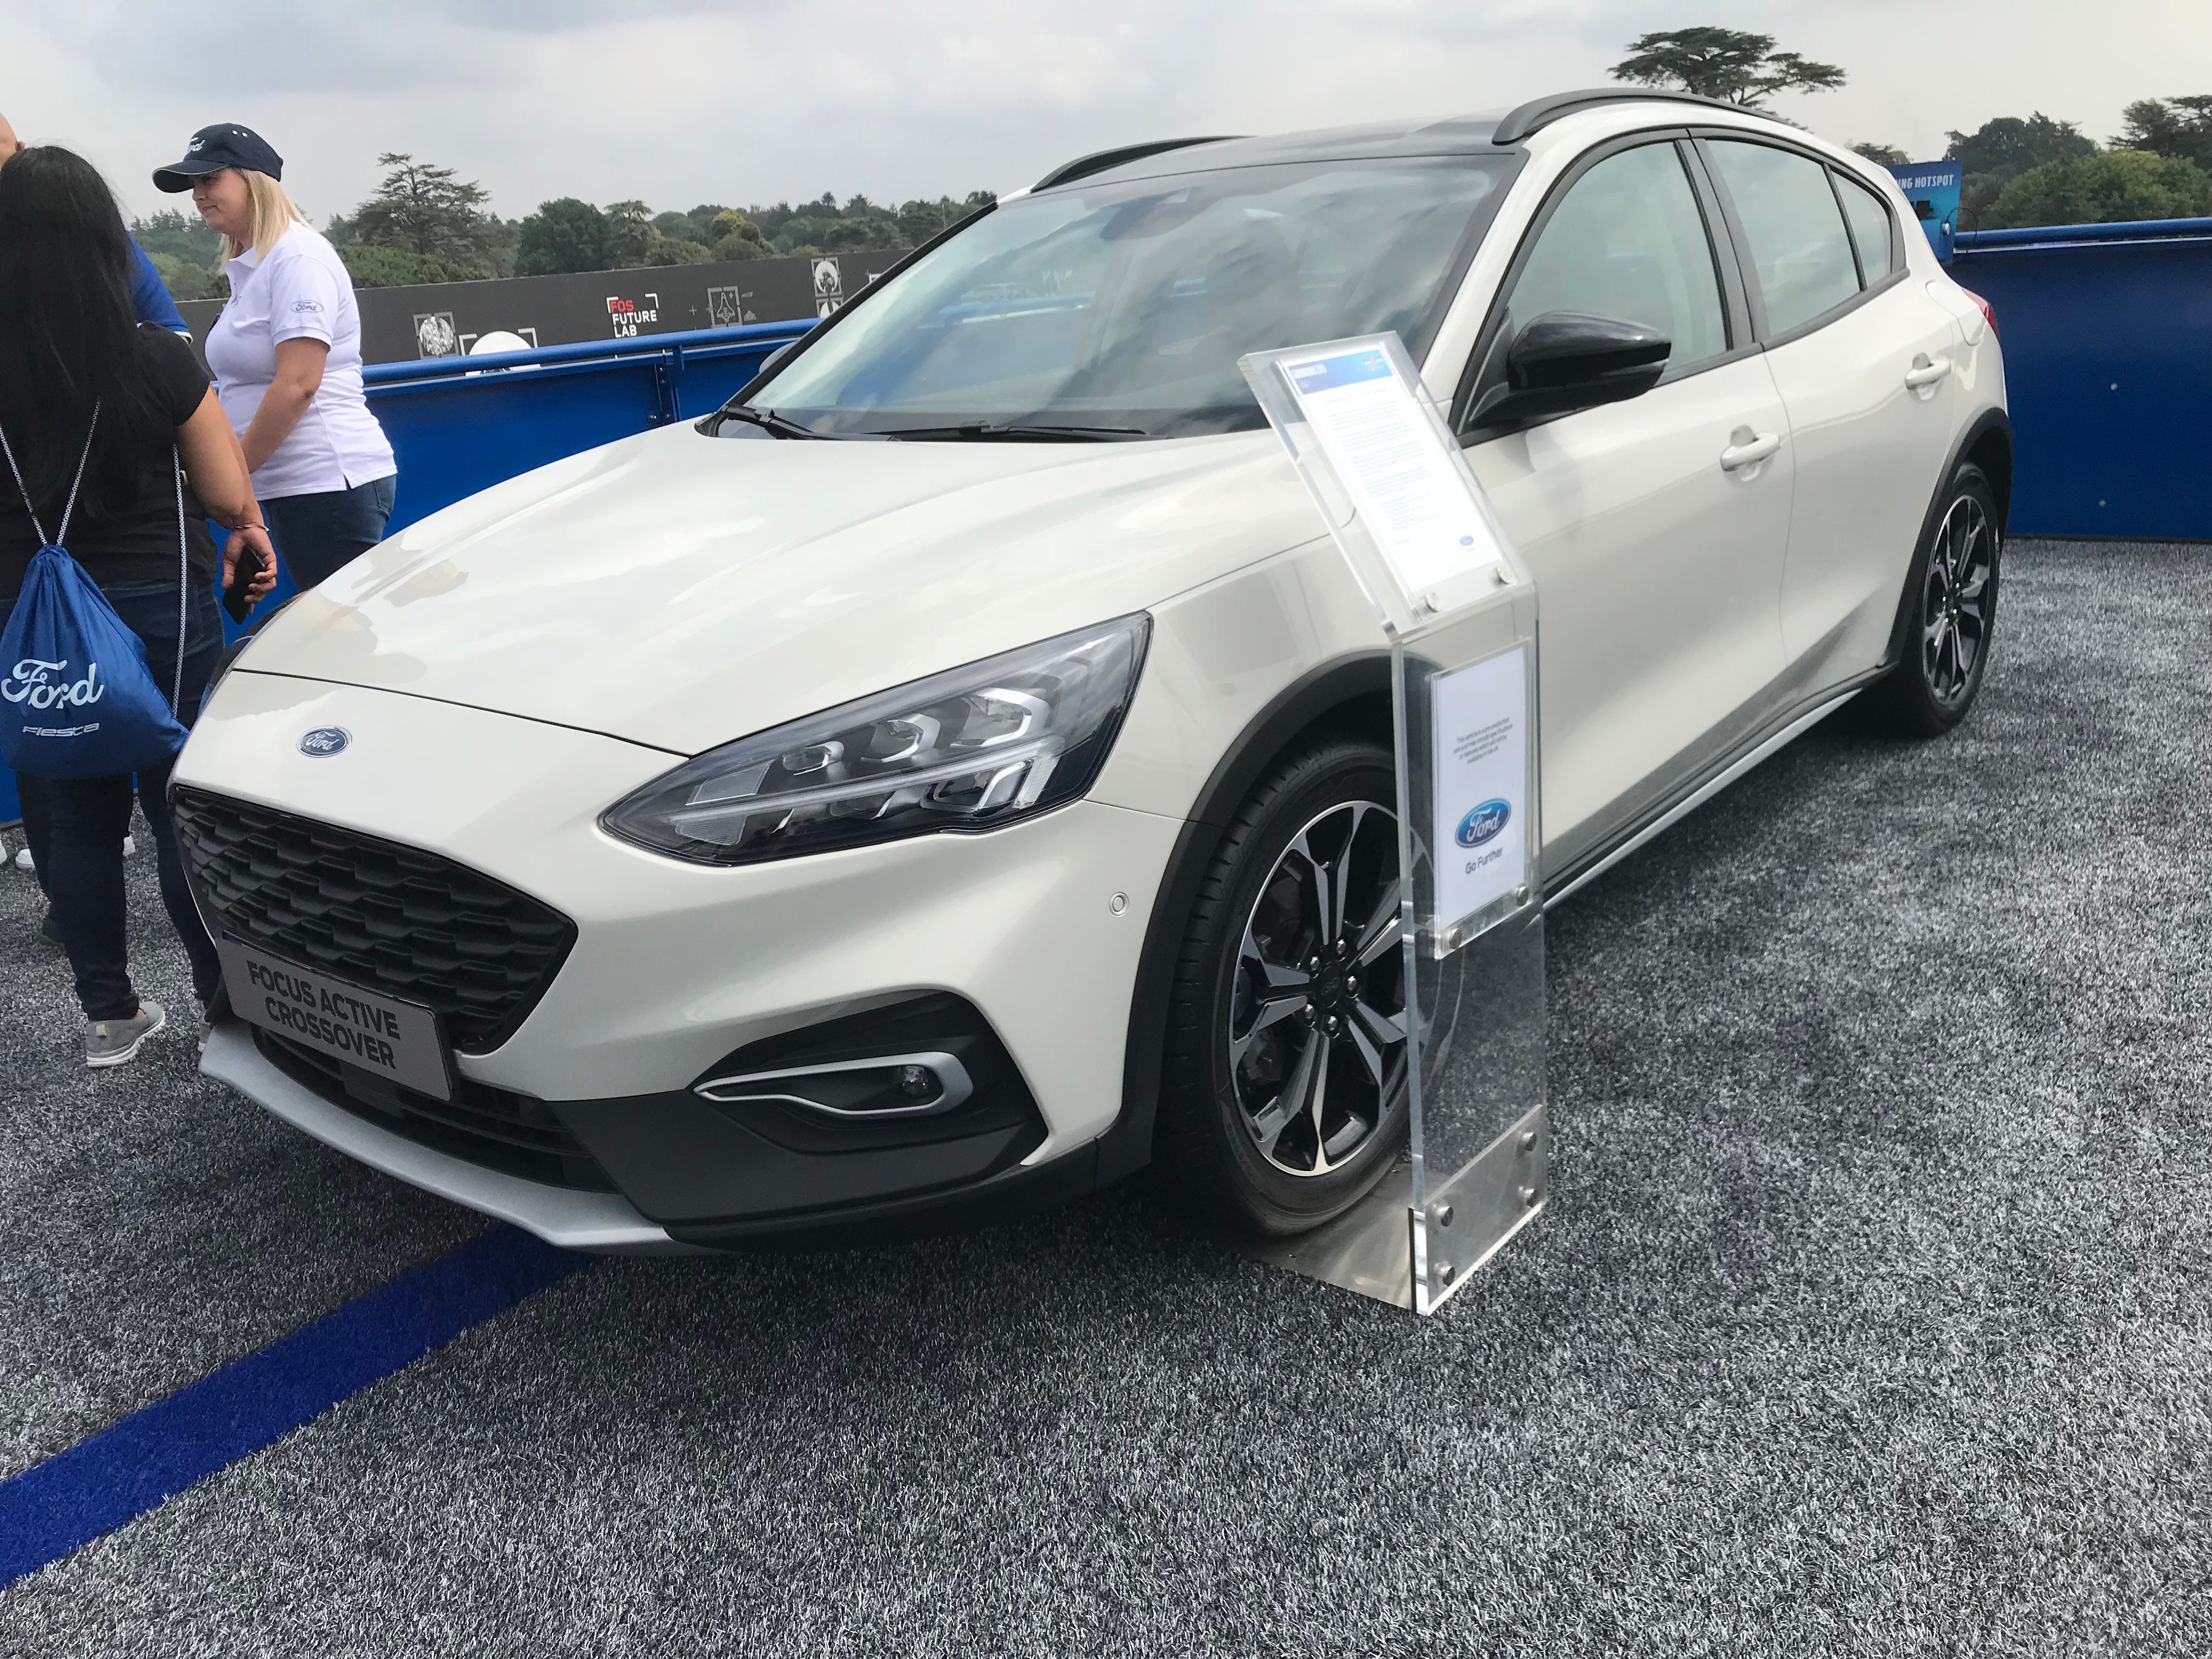 The European-built Focus Active crossover on display at the Festival of Speed in England in July, 2018.